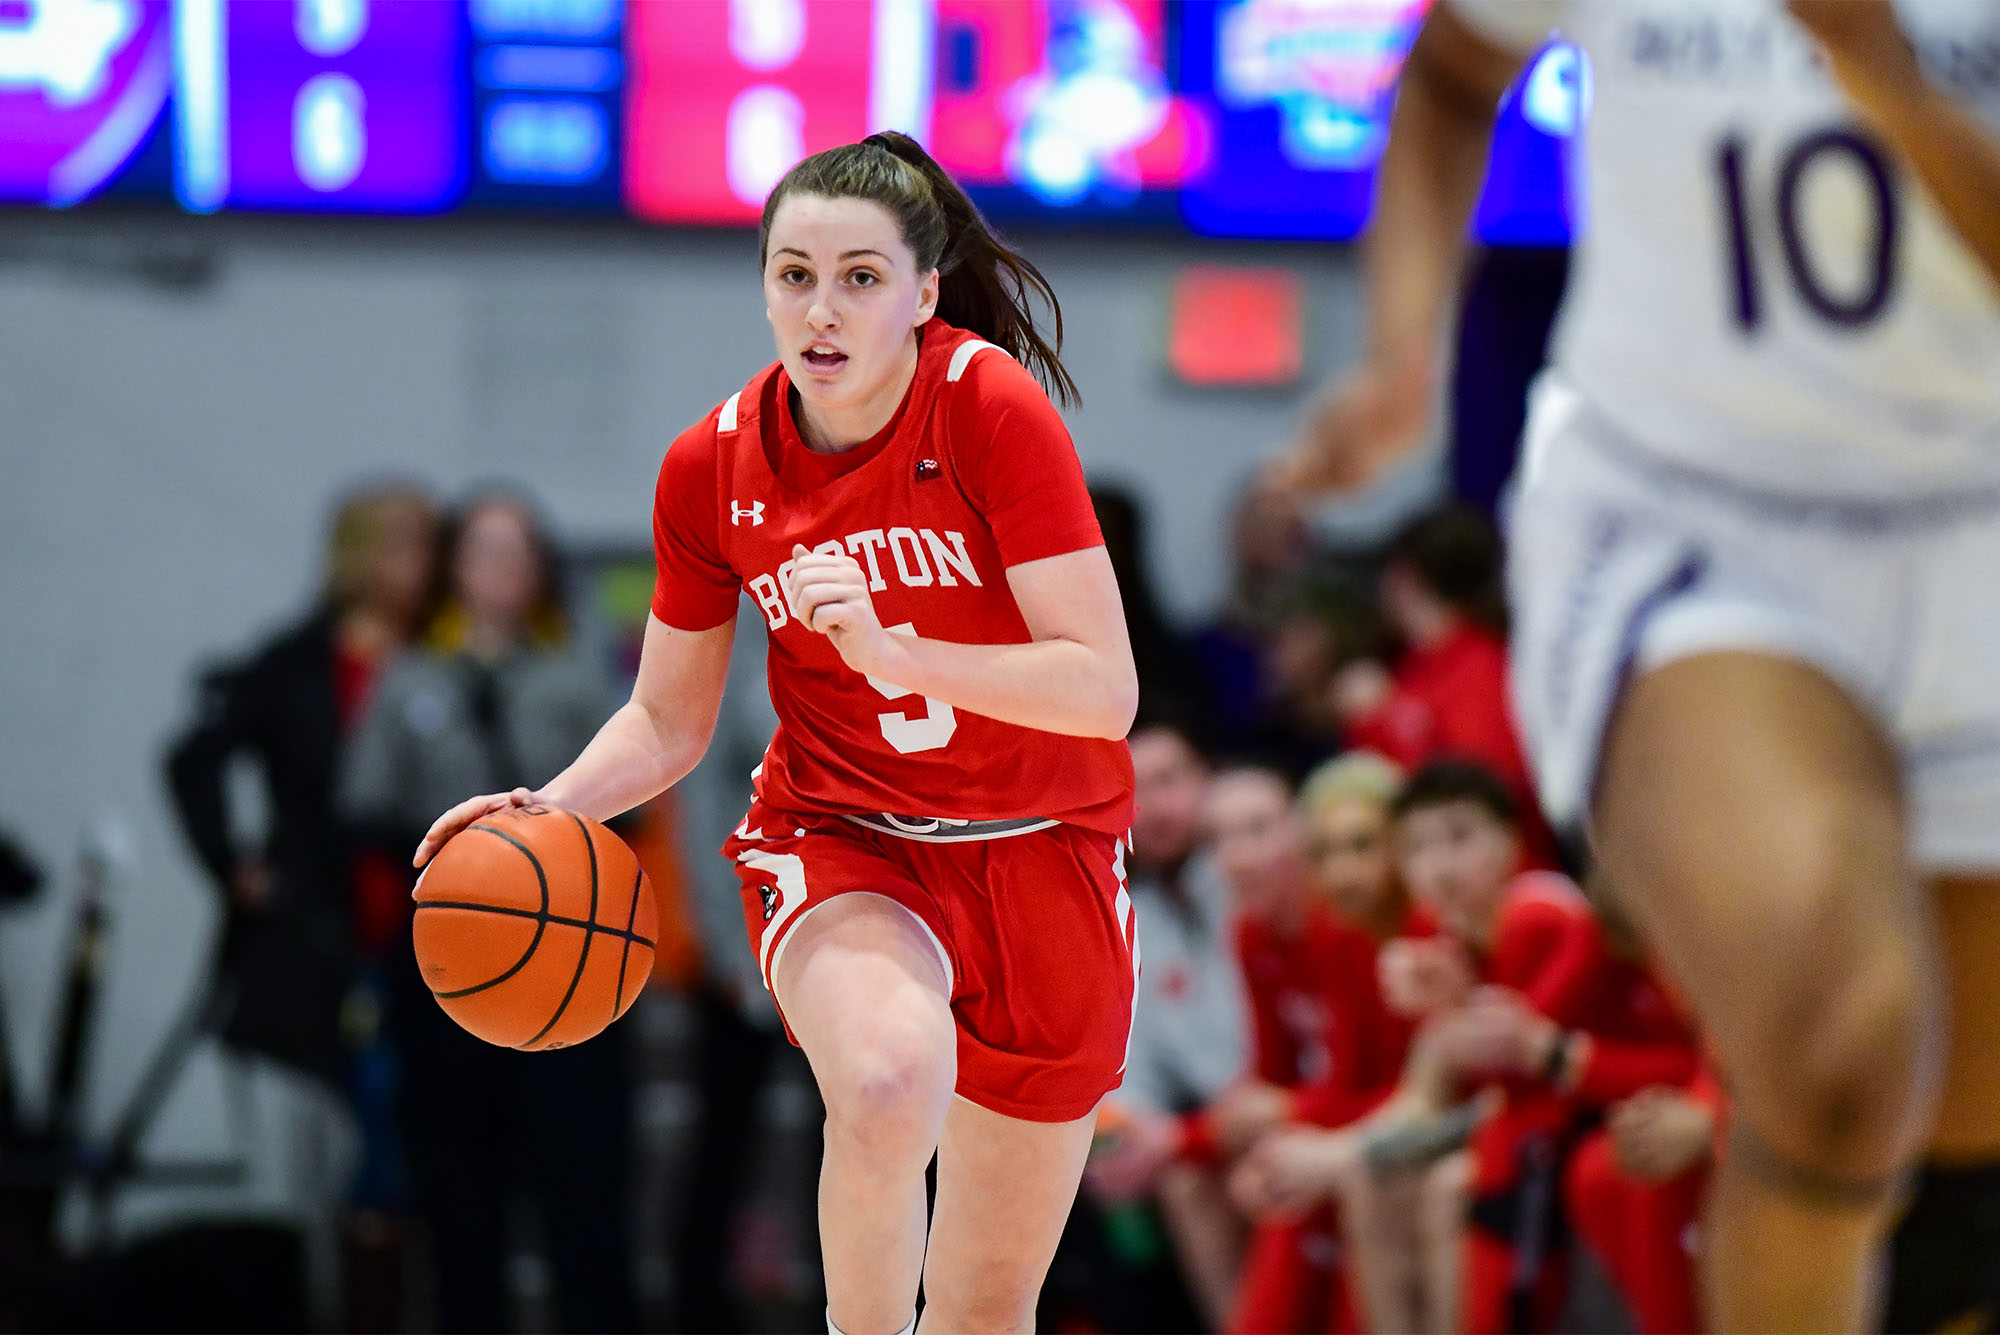 Photo: A Boston University women's basketball player dribbles down the court during a recent game in a red jersey with white trim